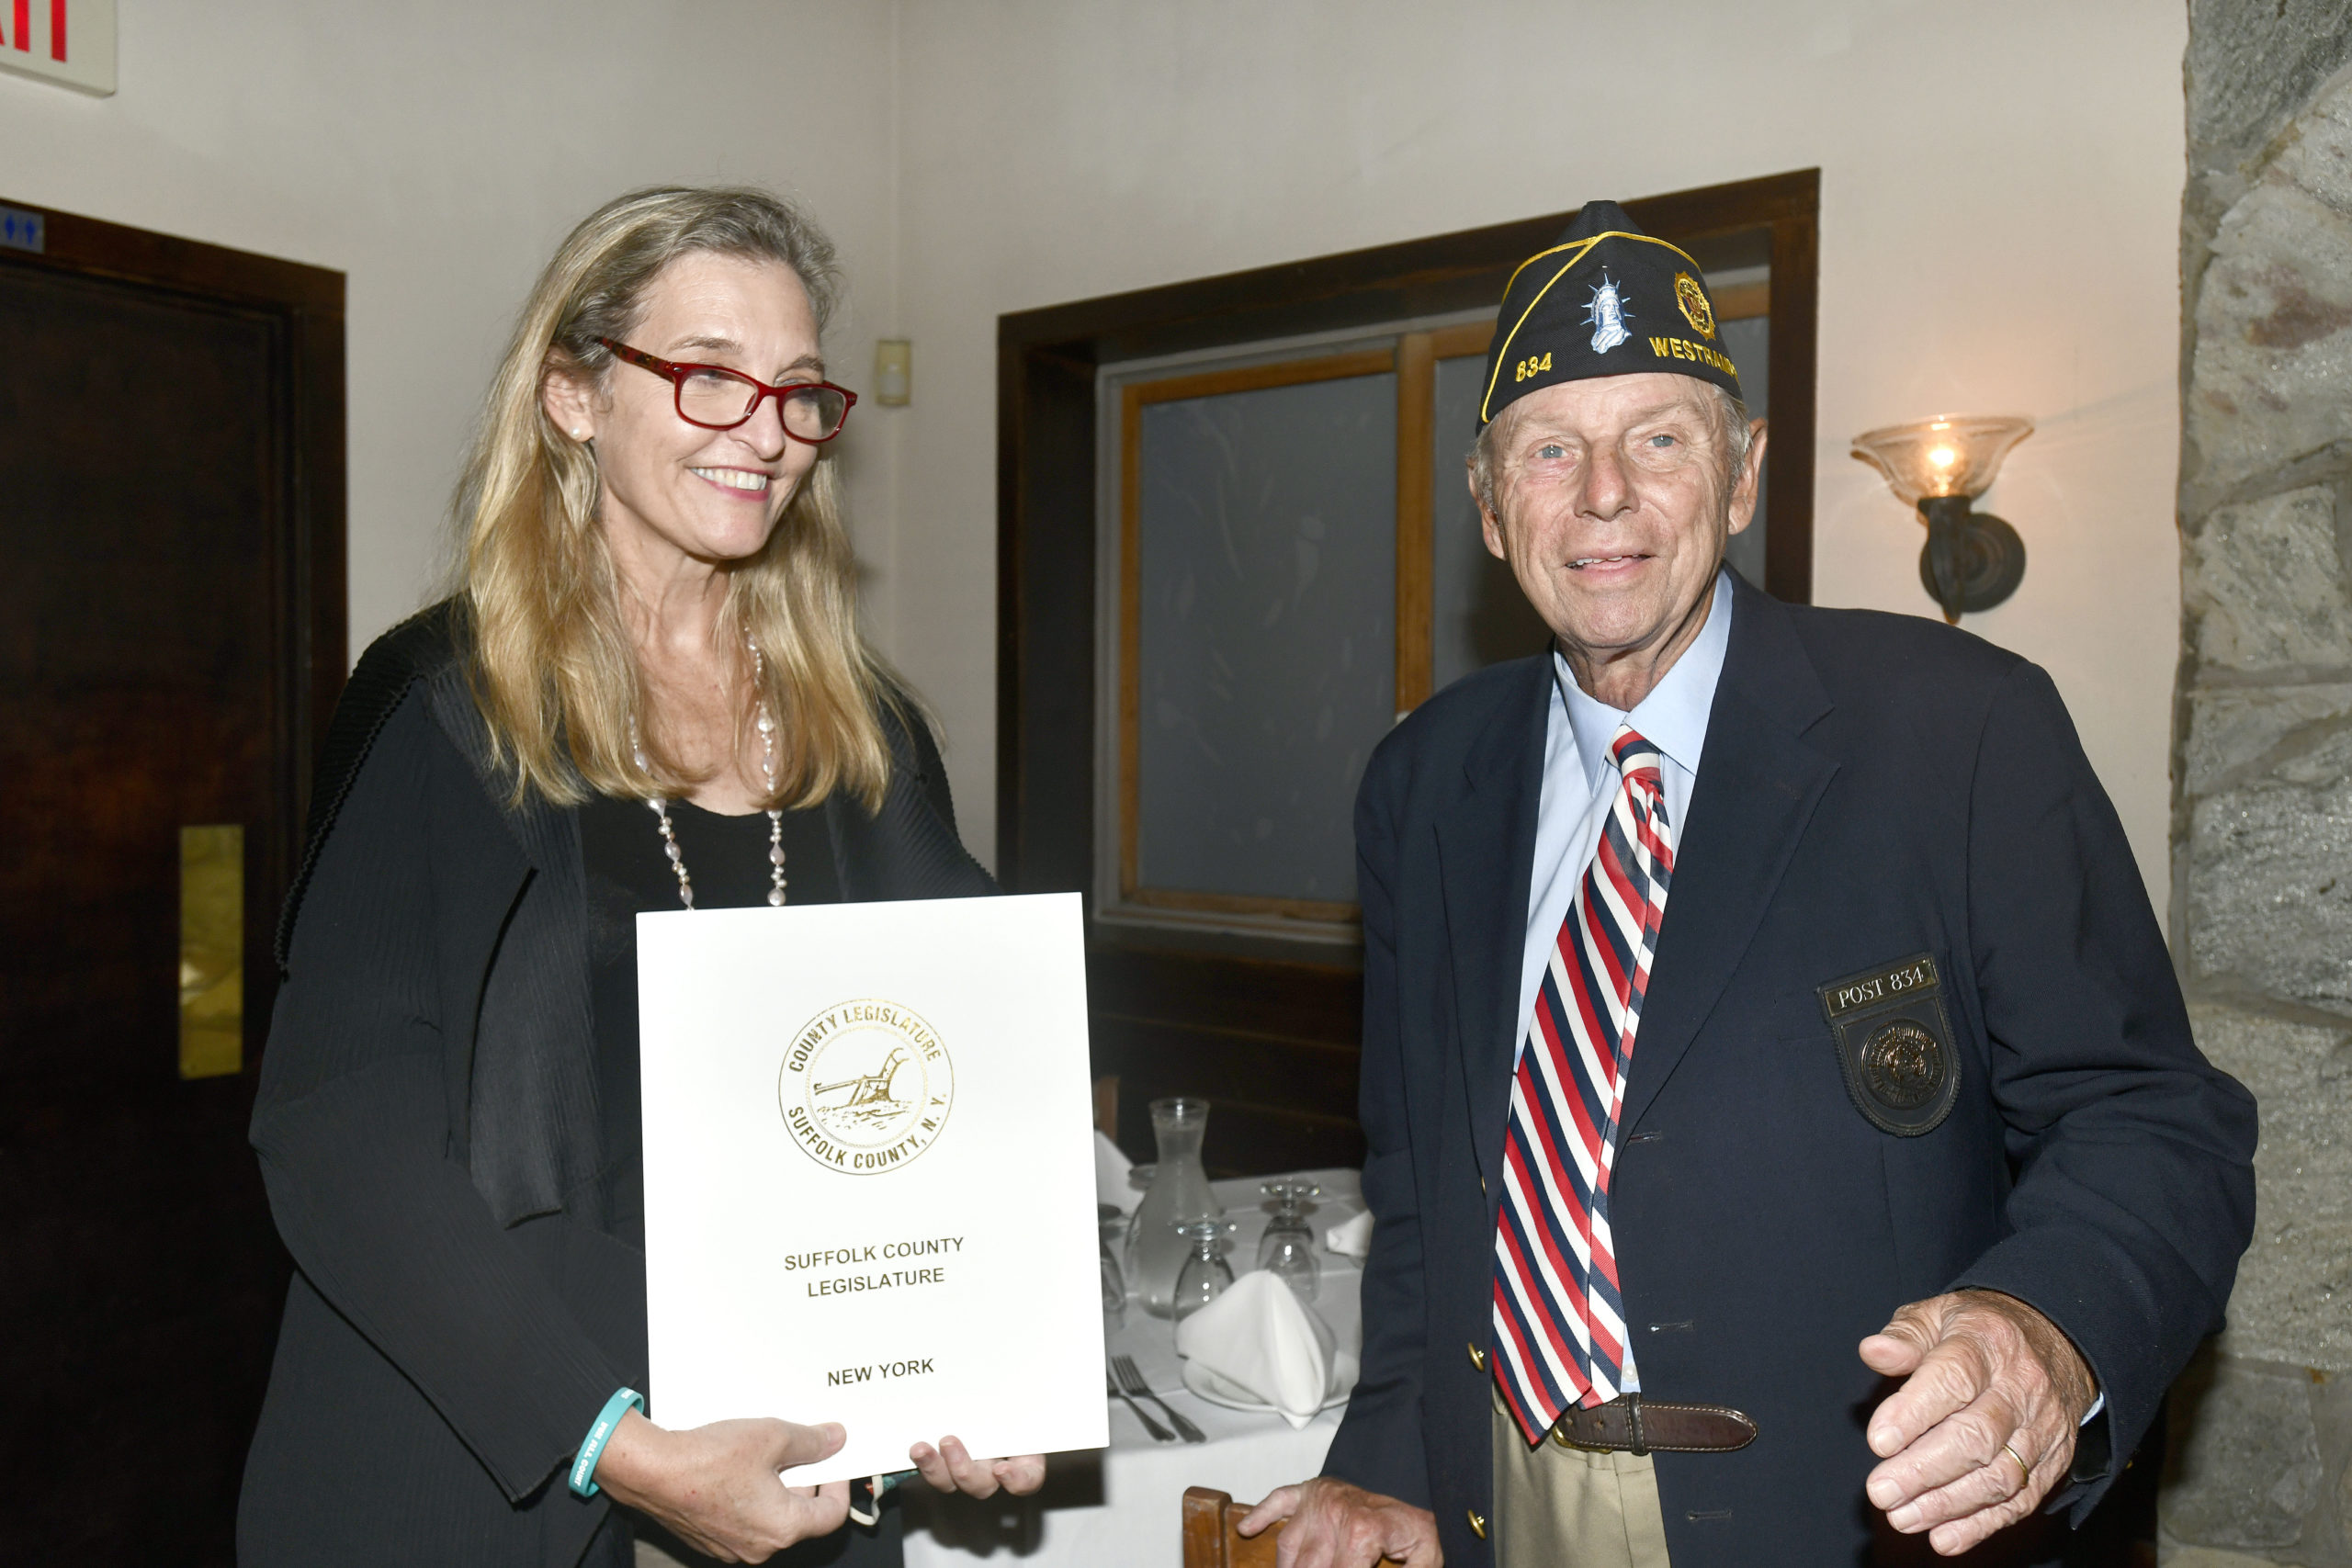 Irene Donohue from Suffolk County Legislator Bridget Fleming's office presents a proclamation to Tom Hadlock, Commander of the American Legion Arthur Ellis Hamm Post 834 in Westhampton, in honor of the post's 100th anniversary on Thursday, September 17, at the Baby Moon restaurant. DANA SHAW